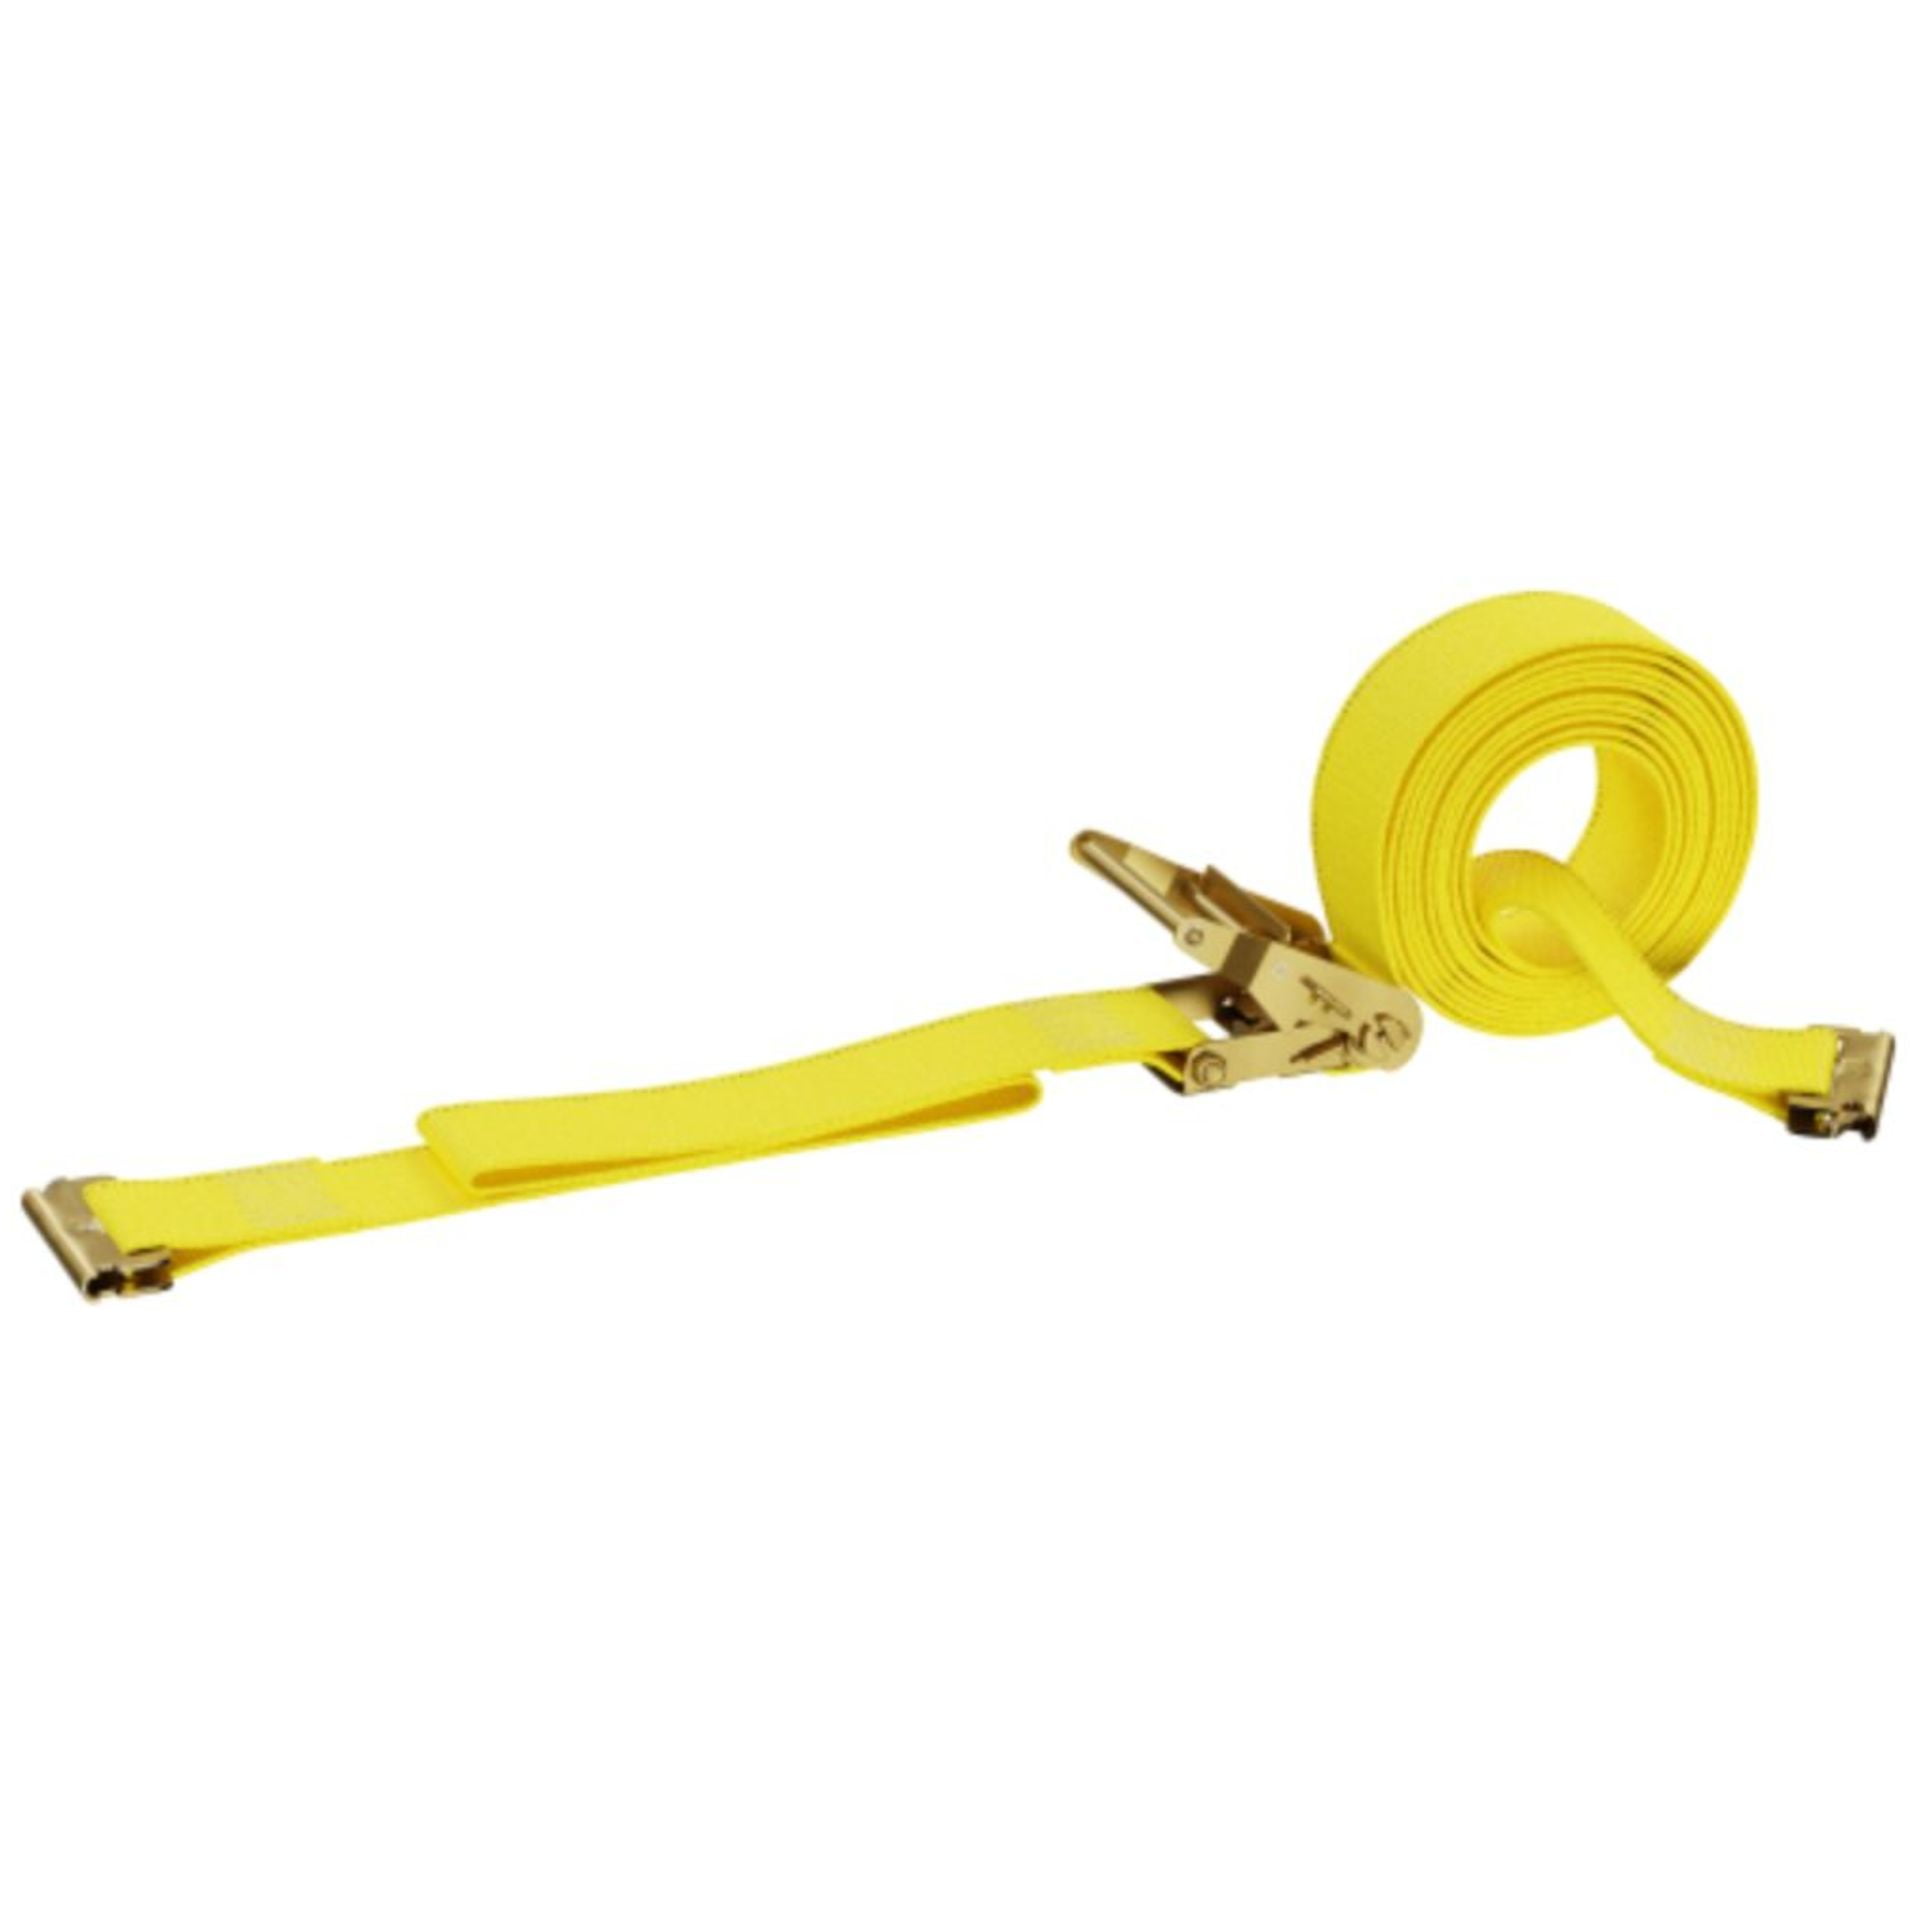 US Cargo Control 5312SEFWH-Y 2'' x 12' Yellow E-Track Straps w/Spring